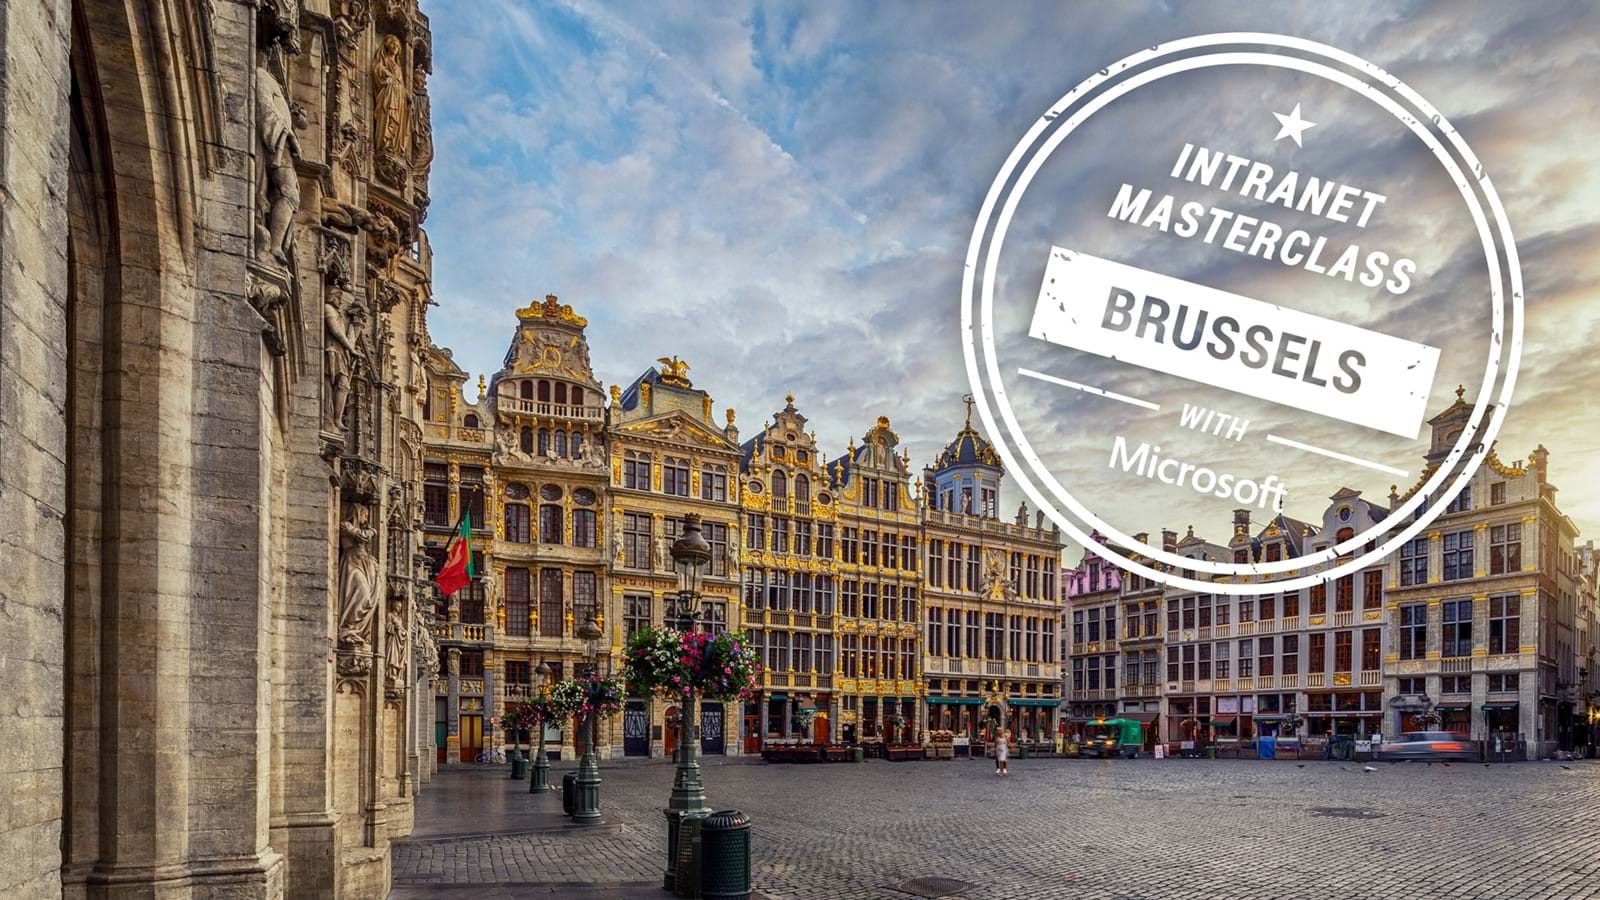 Unily's FREE Virtual Intranet Masterclass in Brussels